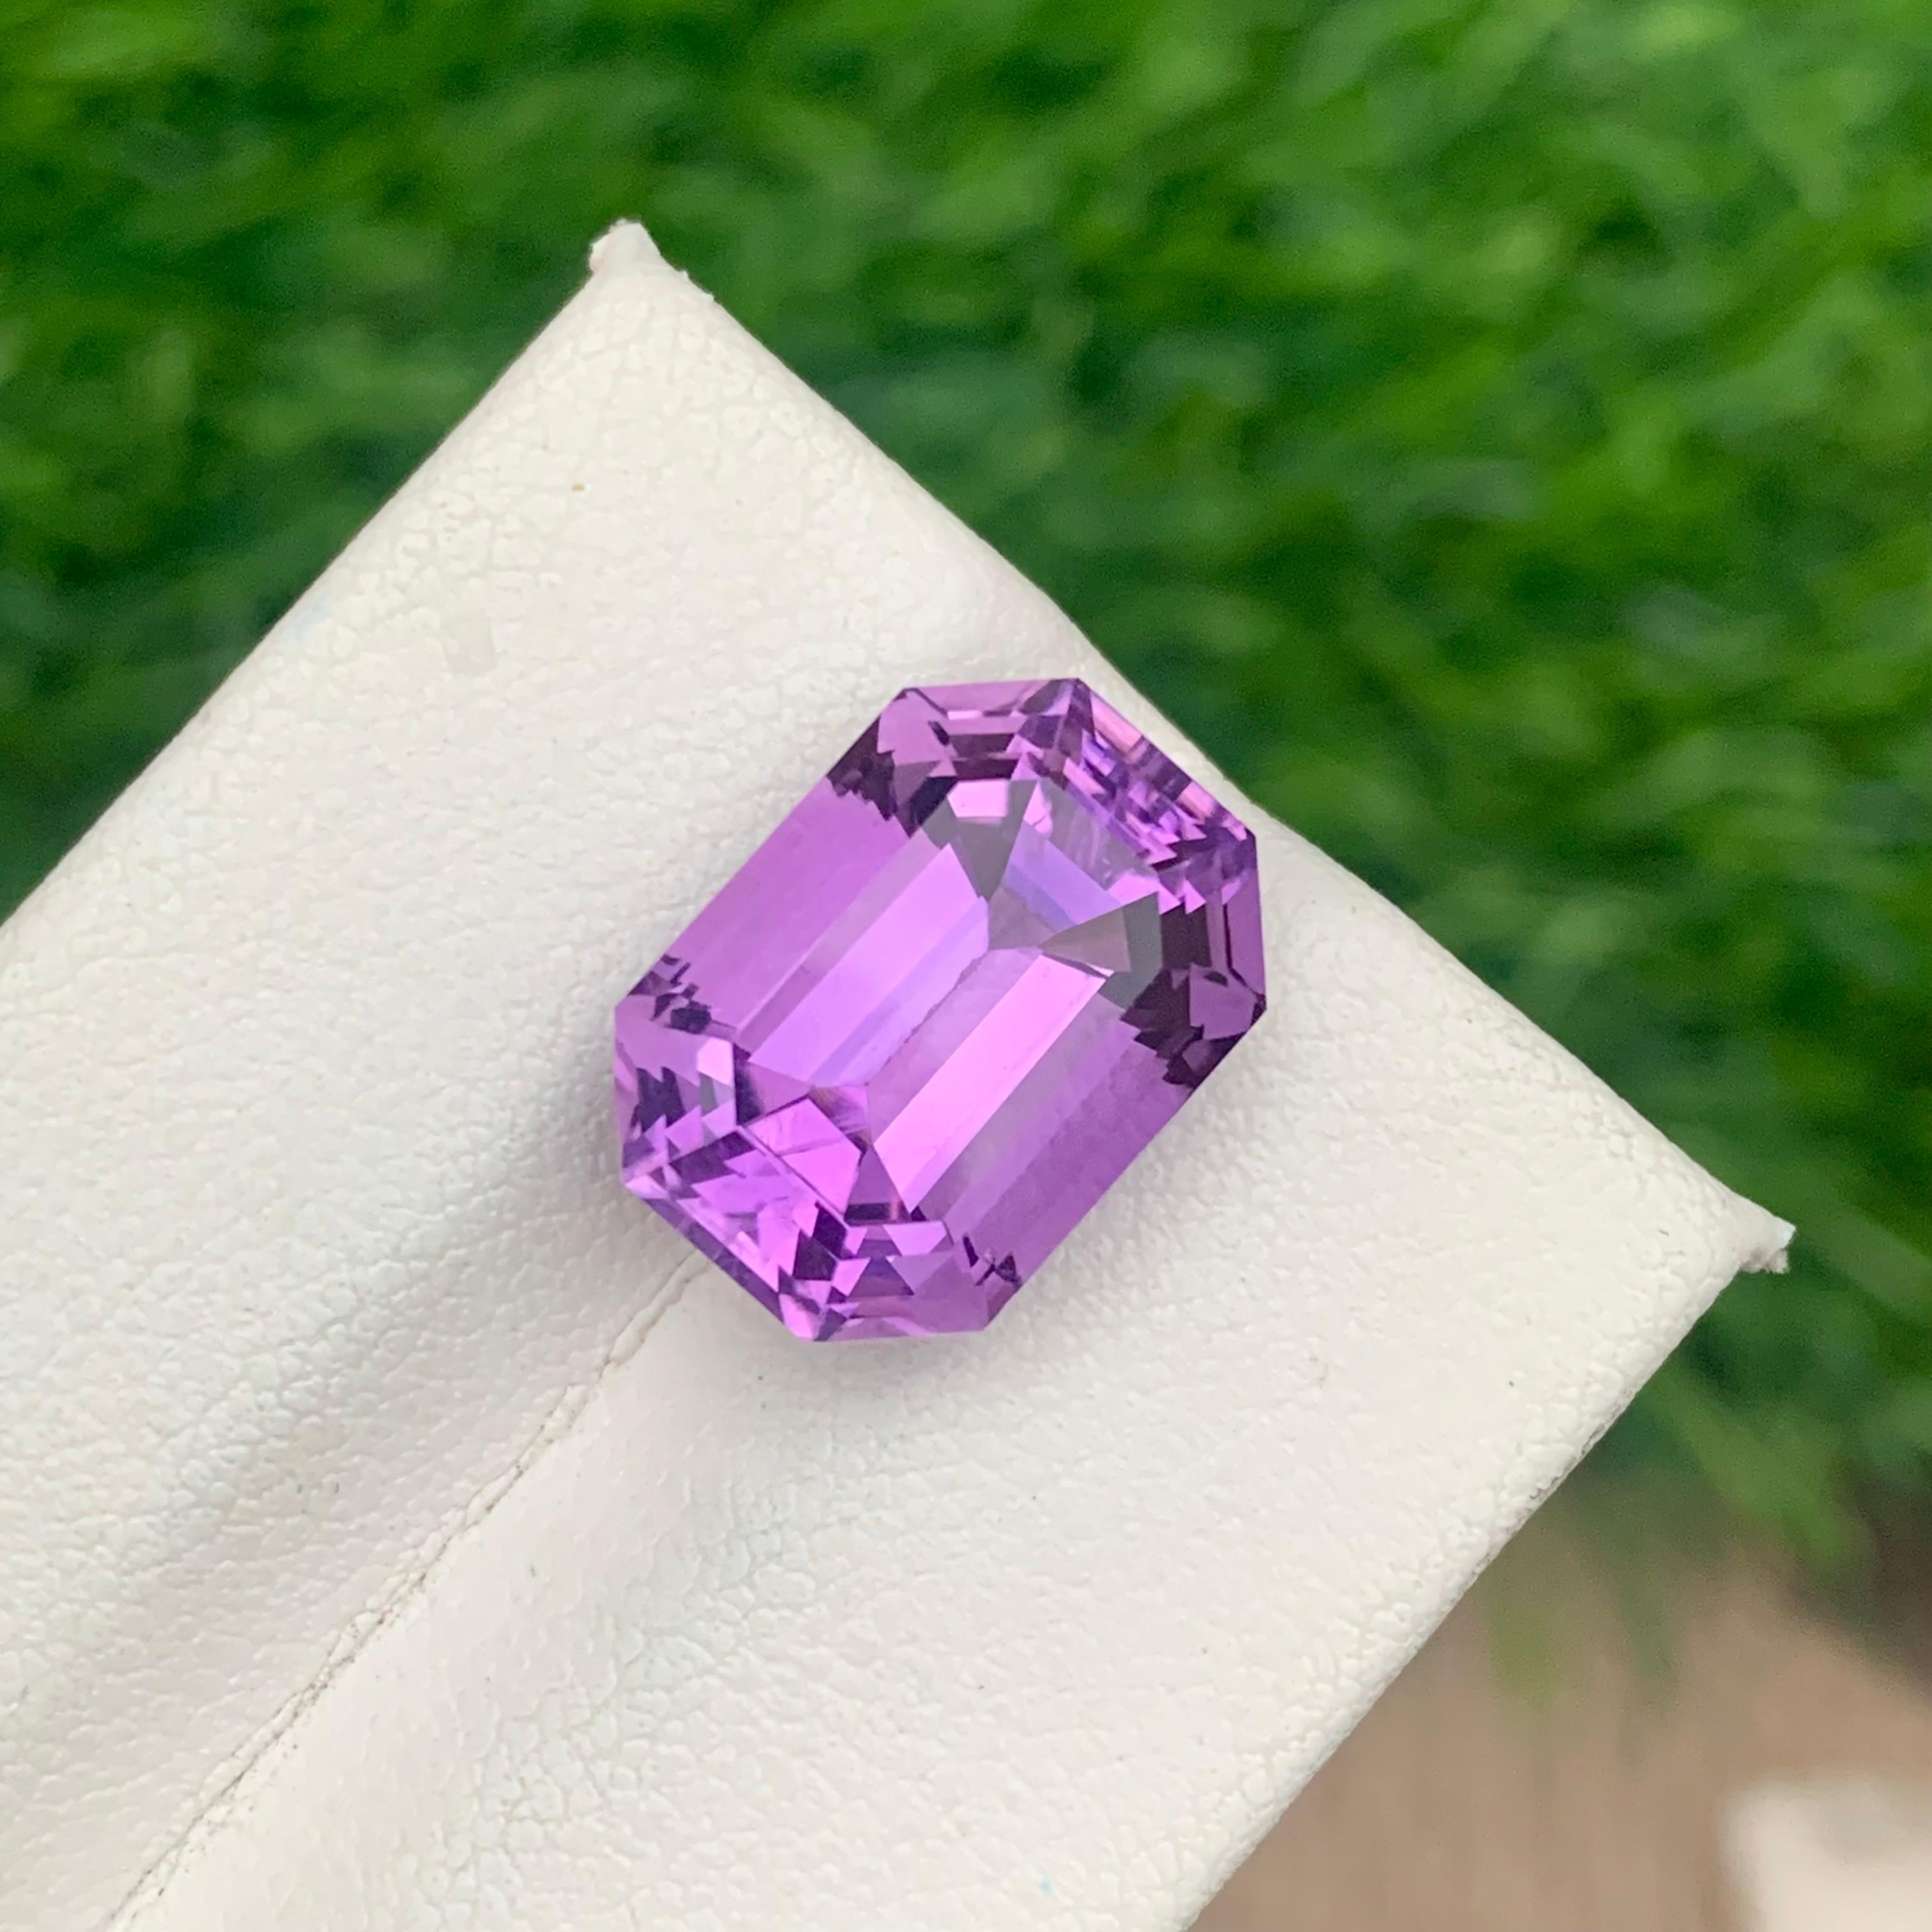 Gemstone Type : Amethyst
Weight : 9.65 Carats
Dimensions: 14.4x10.3x9.5 mm
Clarity : Clean
Origin : Brazil
Color: Purple
Shape: Emerald
Facet: Step Cut
Certificate: On Demand
Month: February
.
Purported amethyst powers for healing
enhancing the